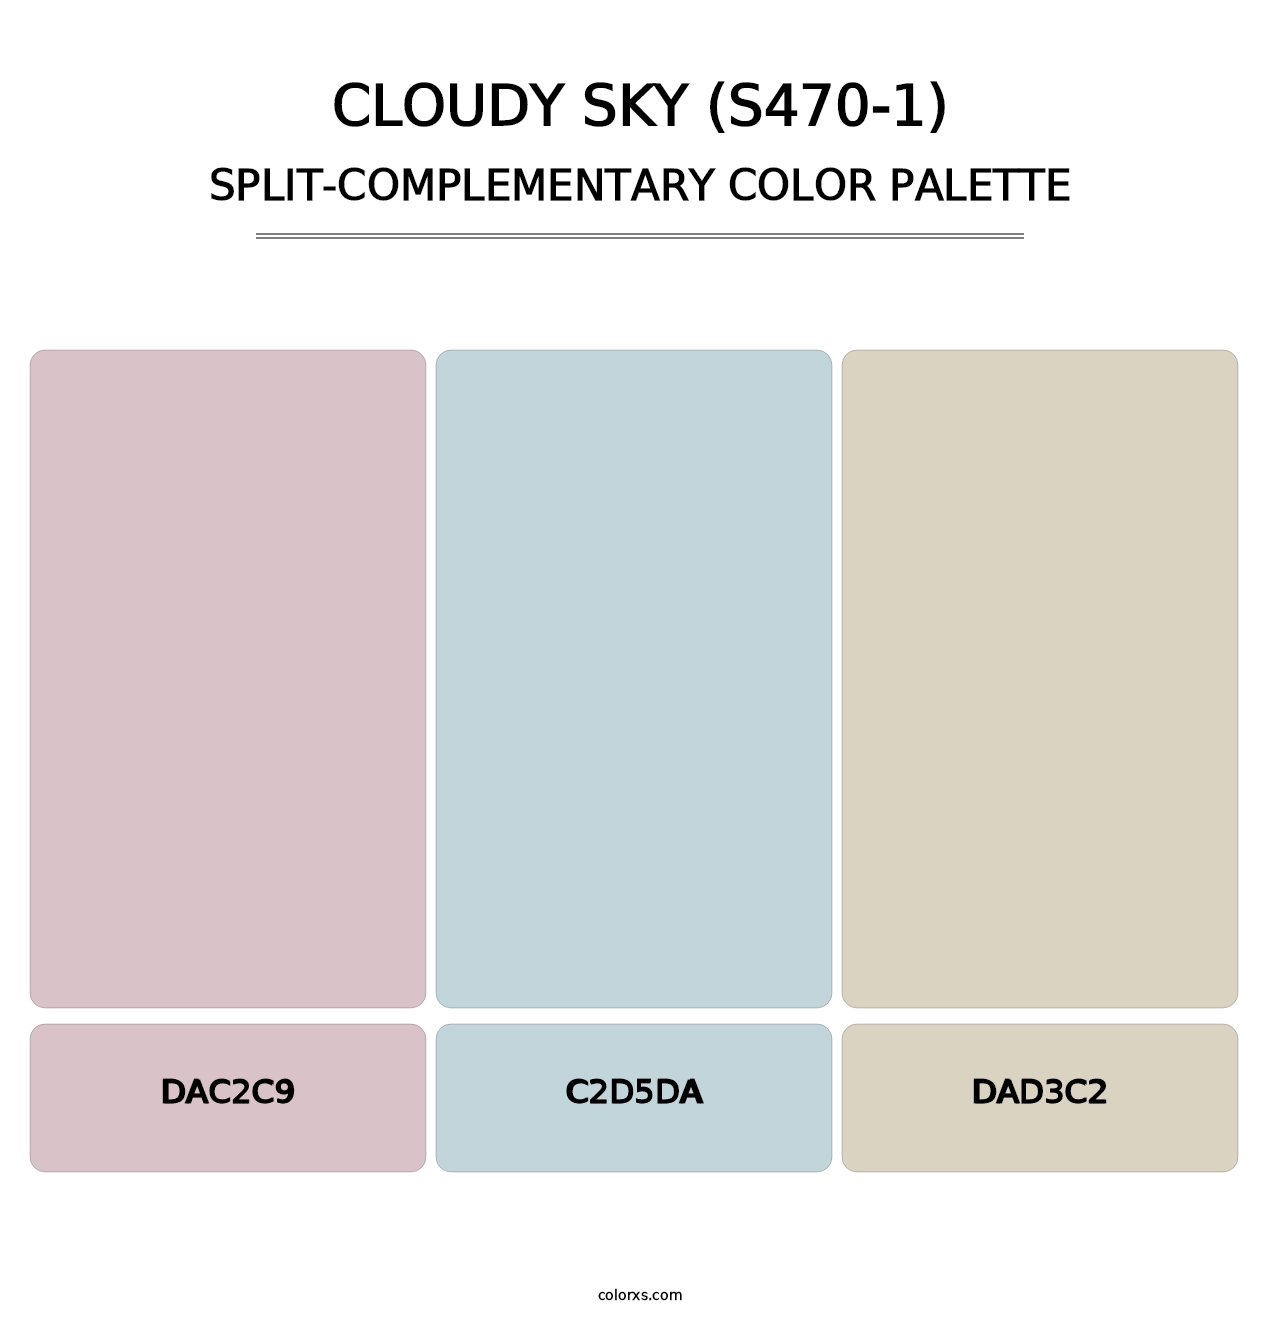 Cloudy Sky (S470-1) - Split-Complementary Color Palette